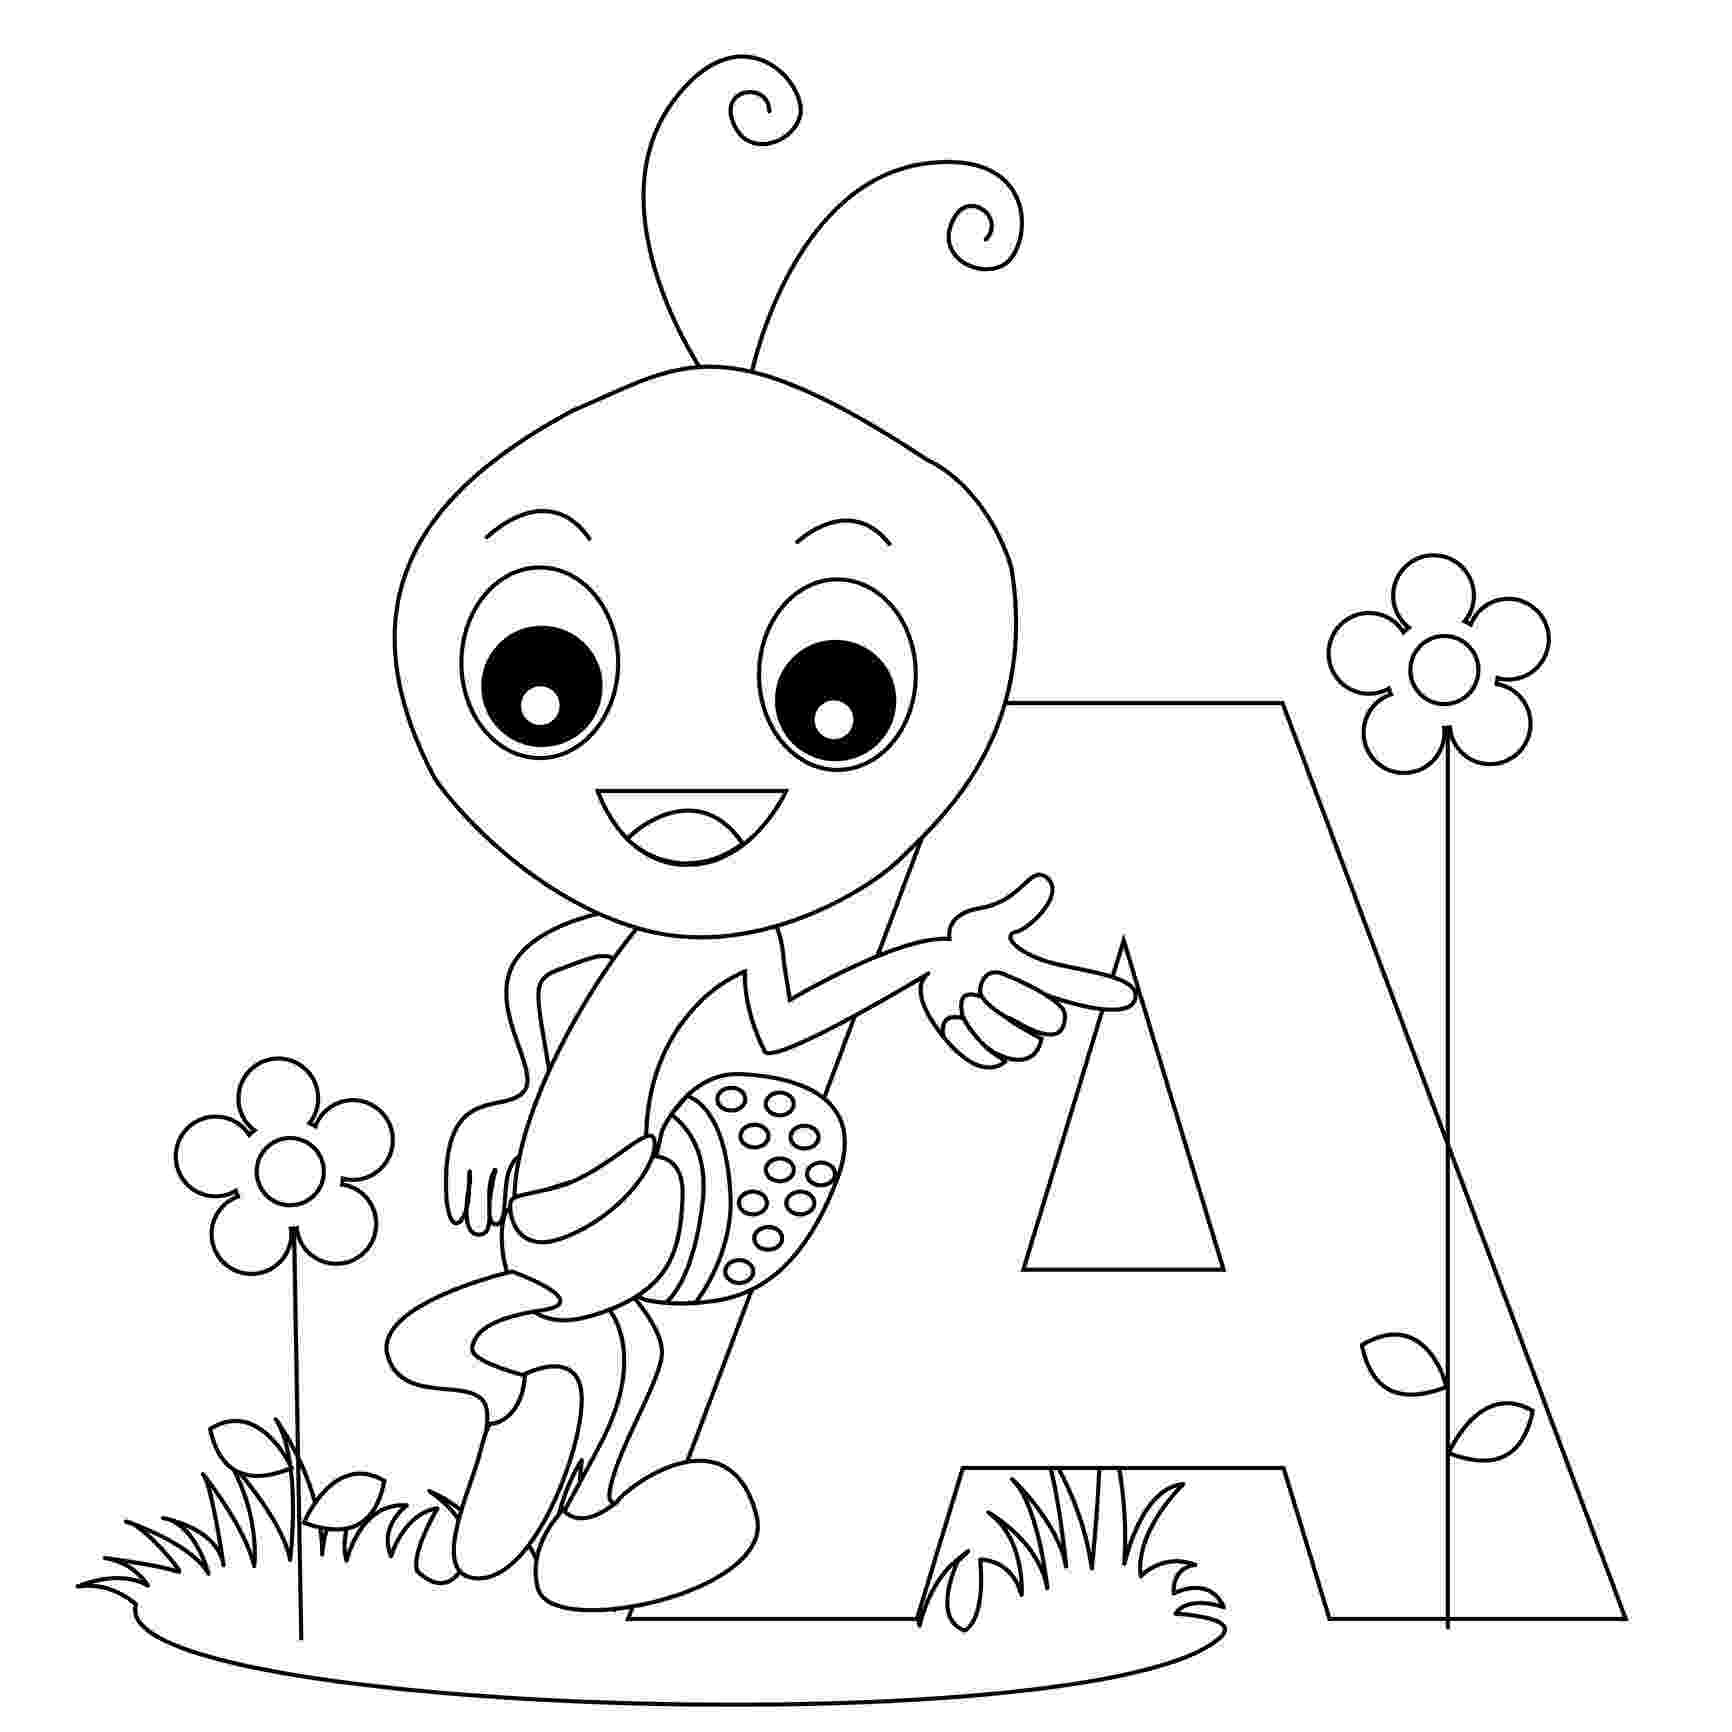 childrens colouring pages alphabet free printable alphabet coloring pages for kids best pages alphabet childrens colouring 